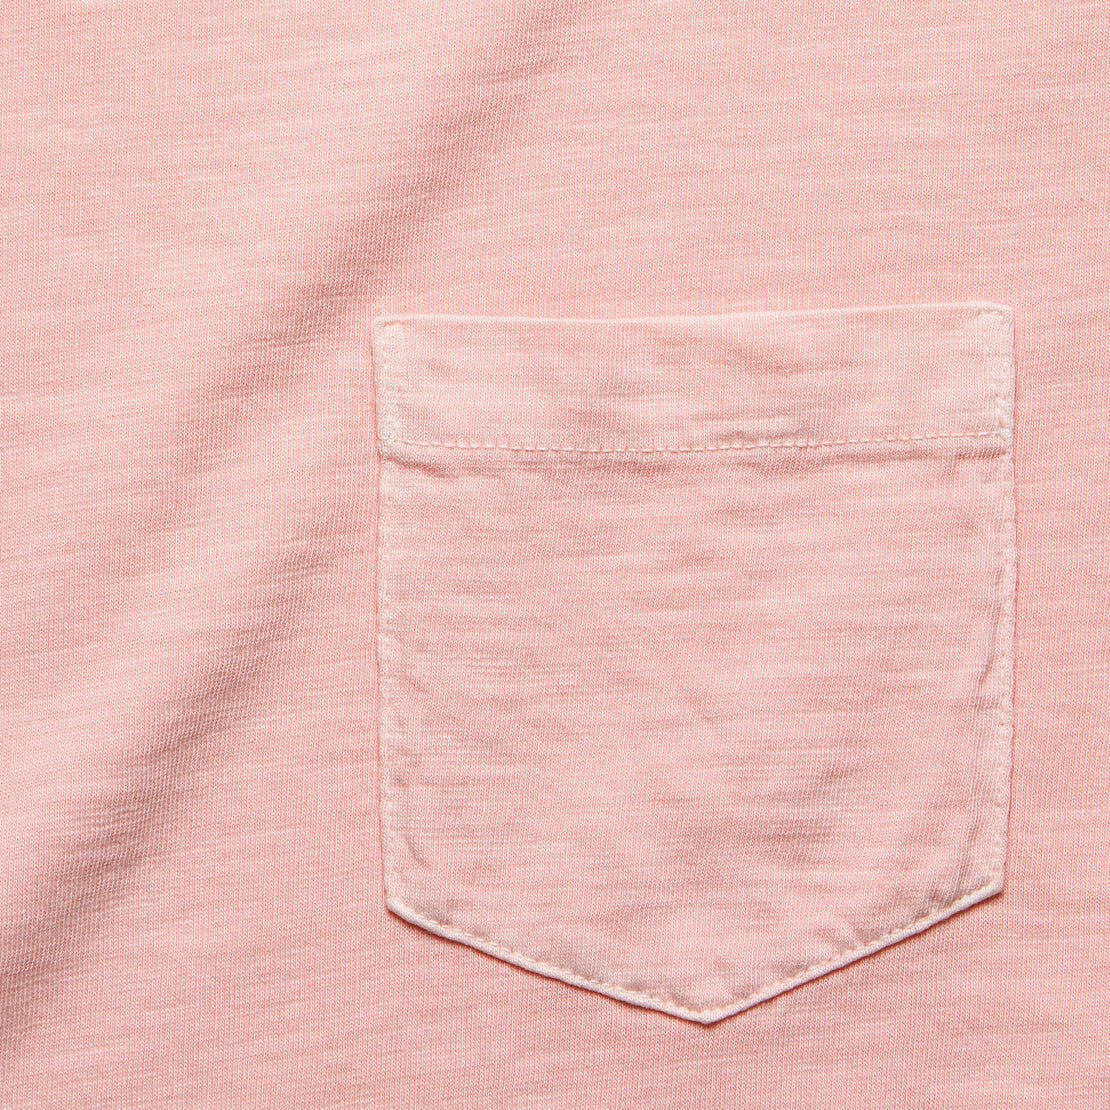 Garment Dye Pocket Tee - Summer Pink - Faherty - STAG Provisions - Tops - S/S Tee